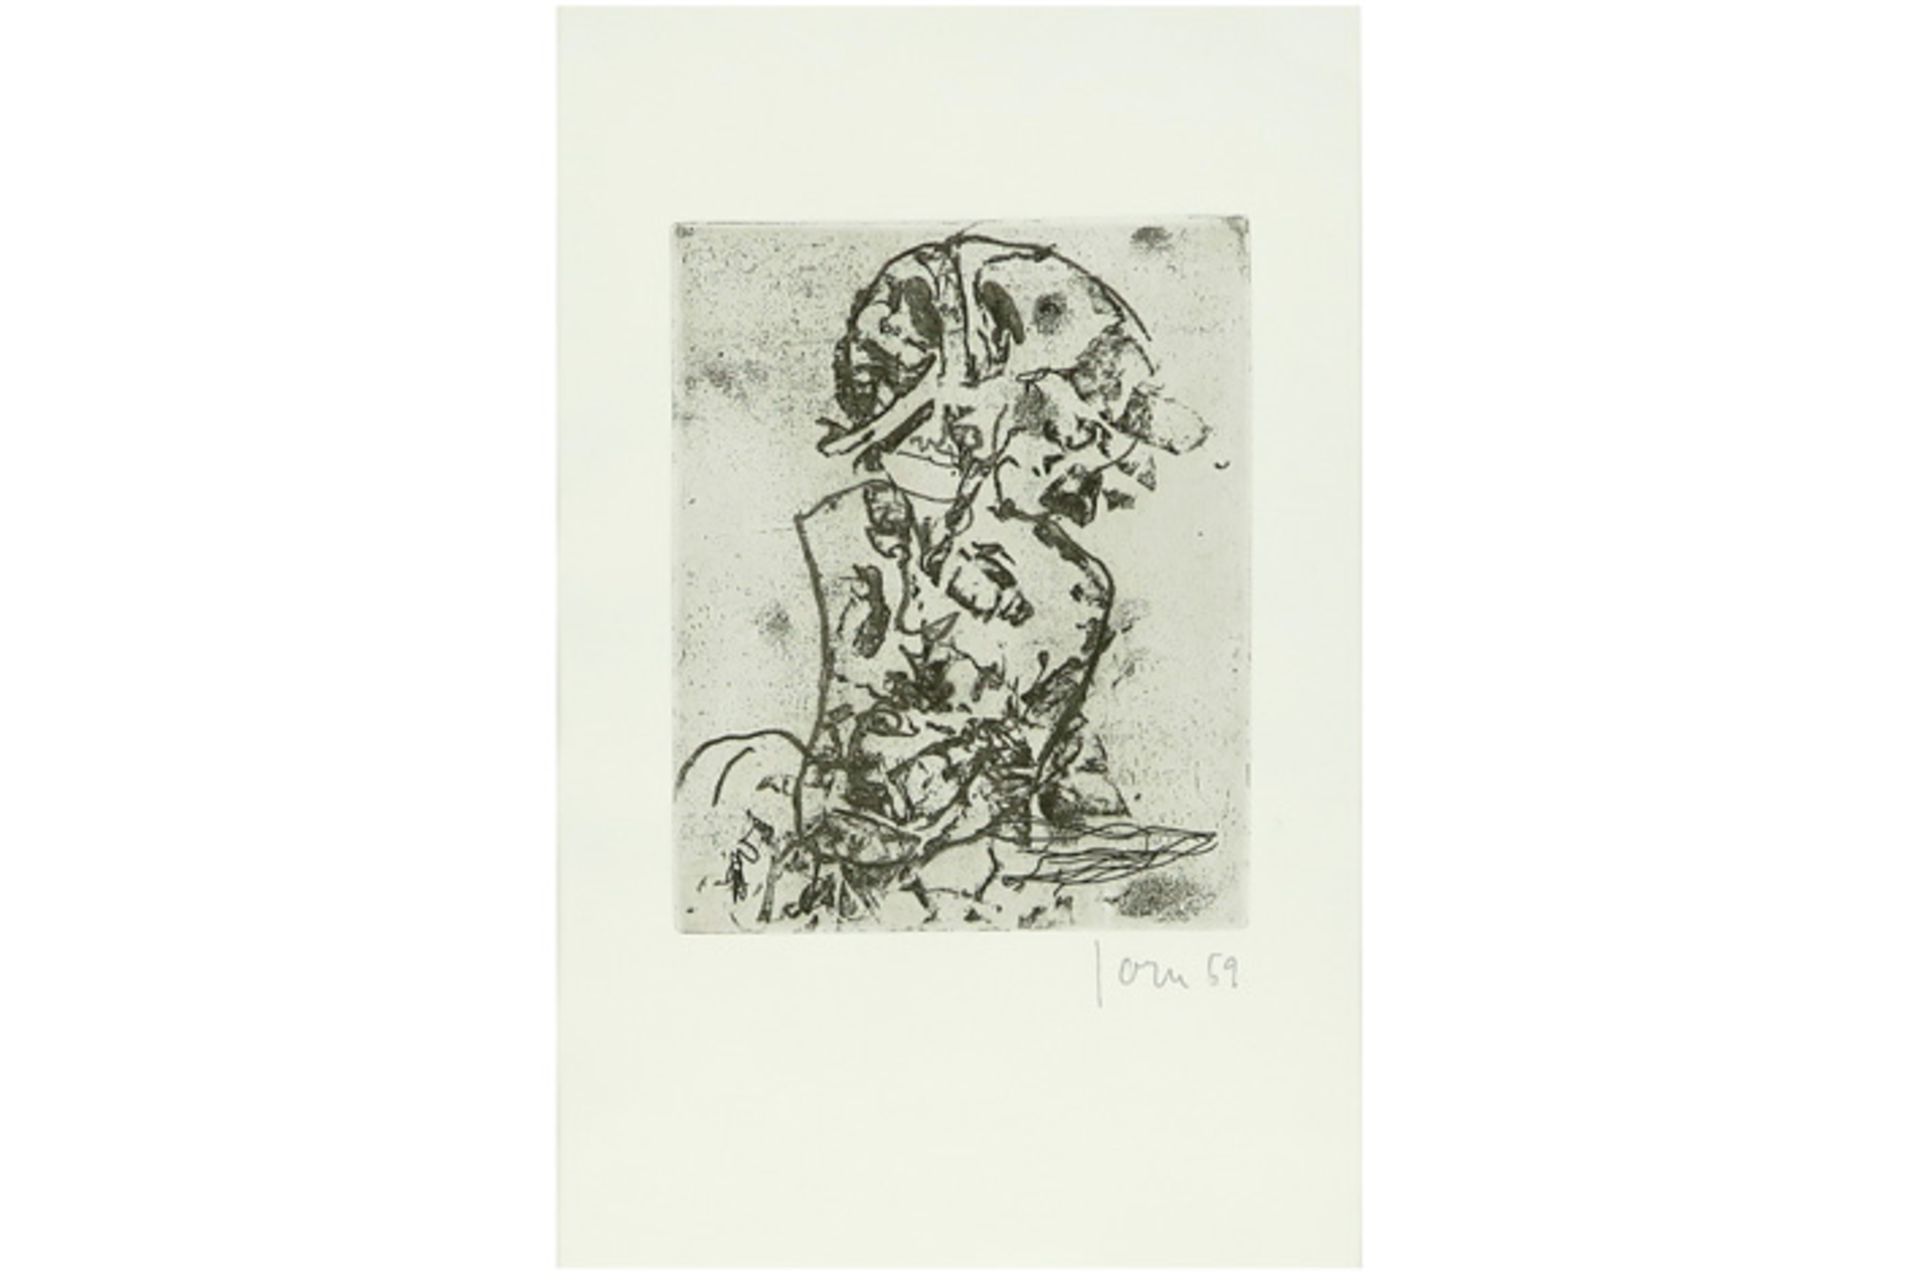 Asger Jorn mixed media print (etching and aquatint) from the portfolio "Friedhof der Maulwürfe" with